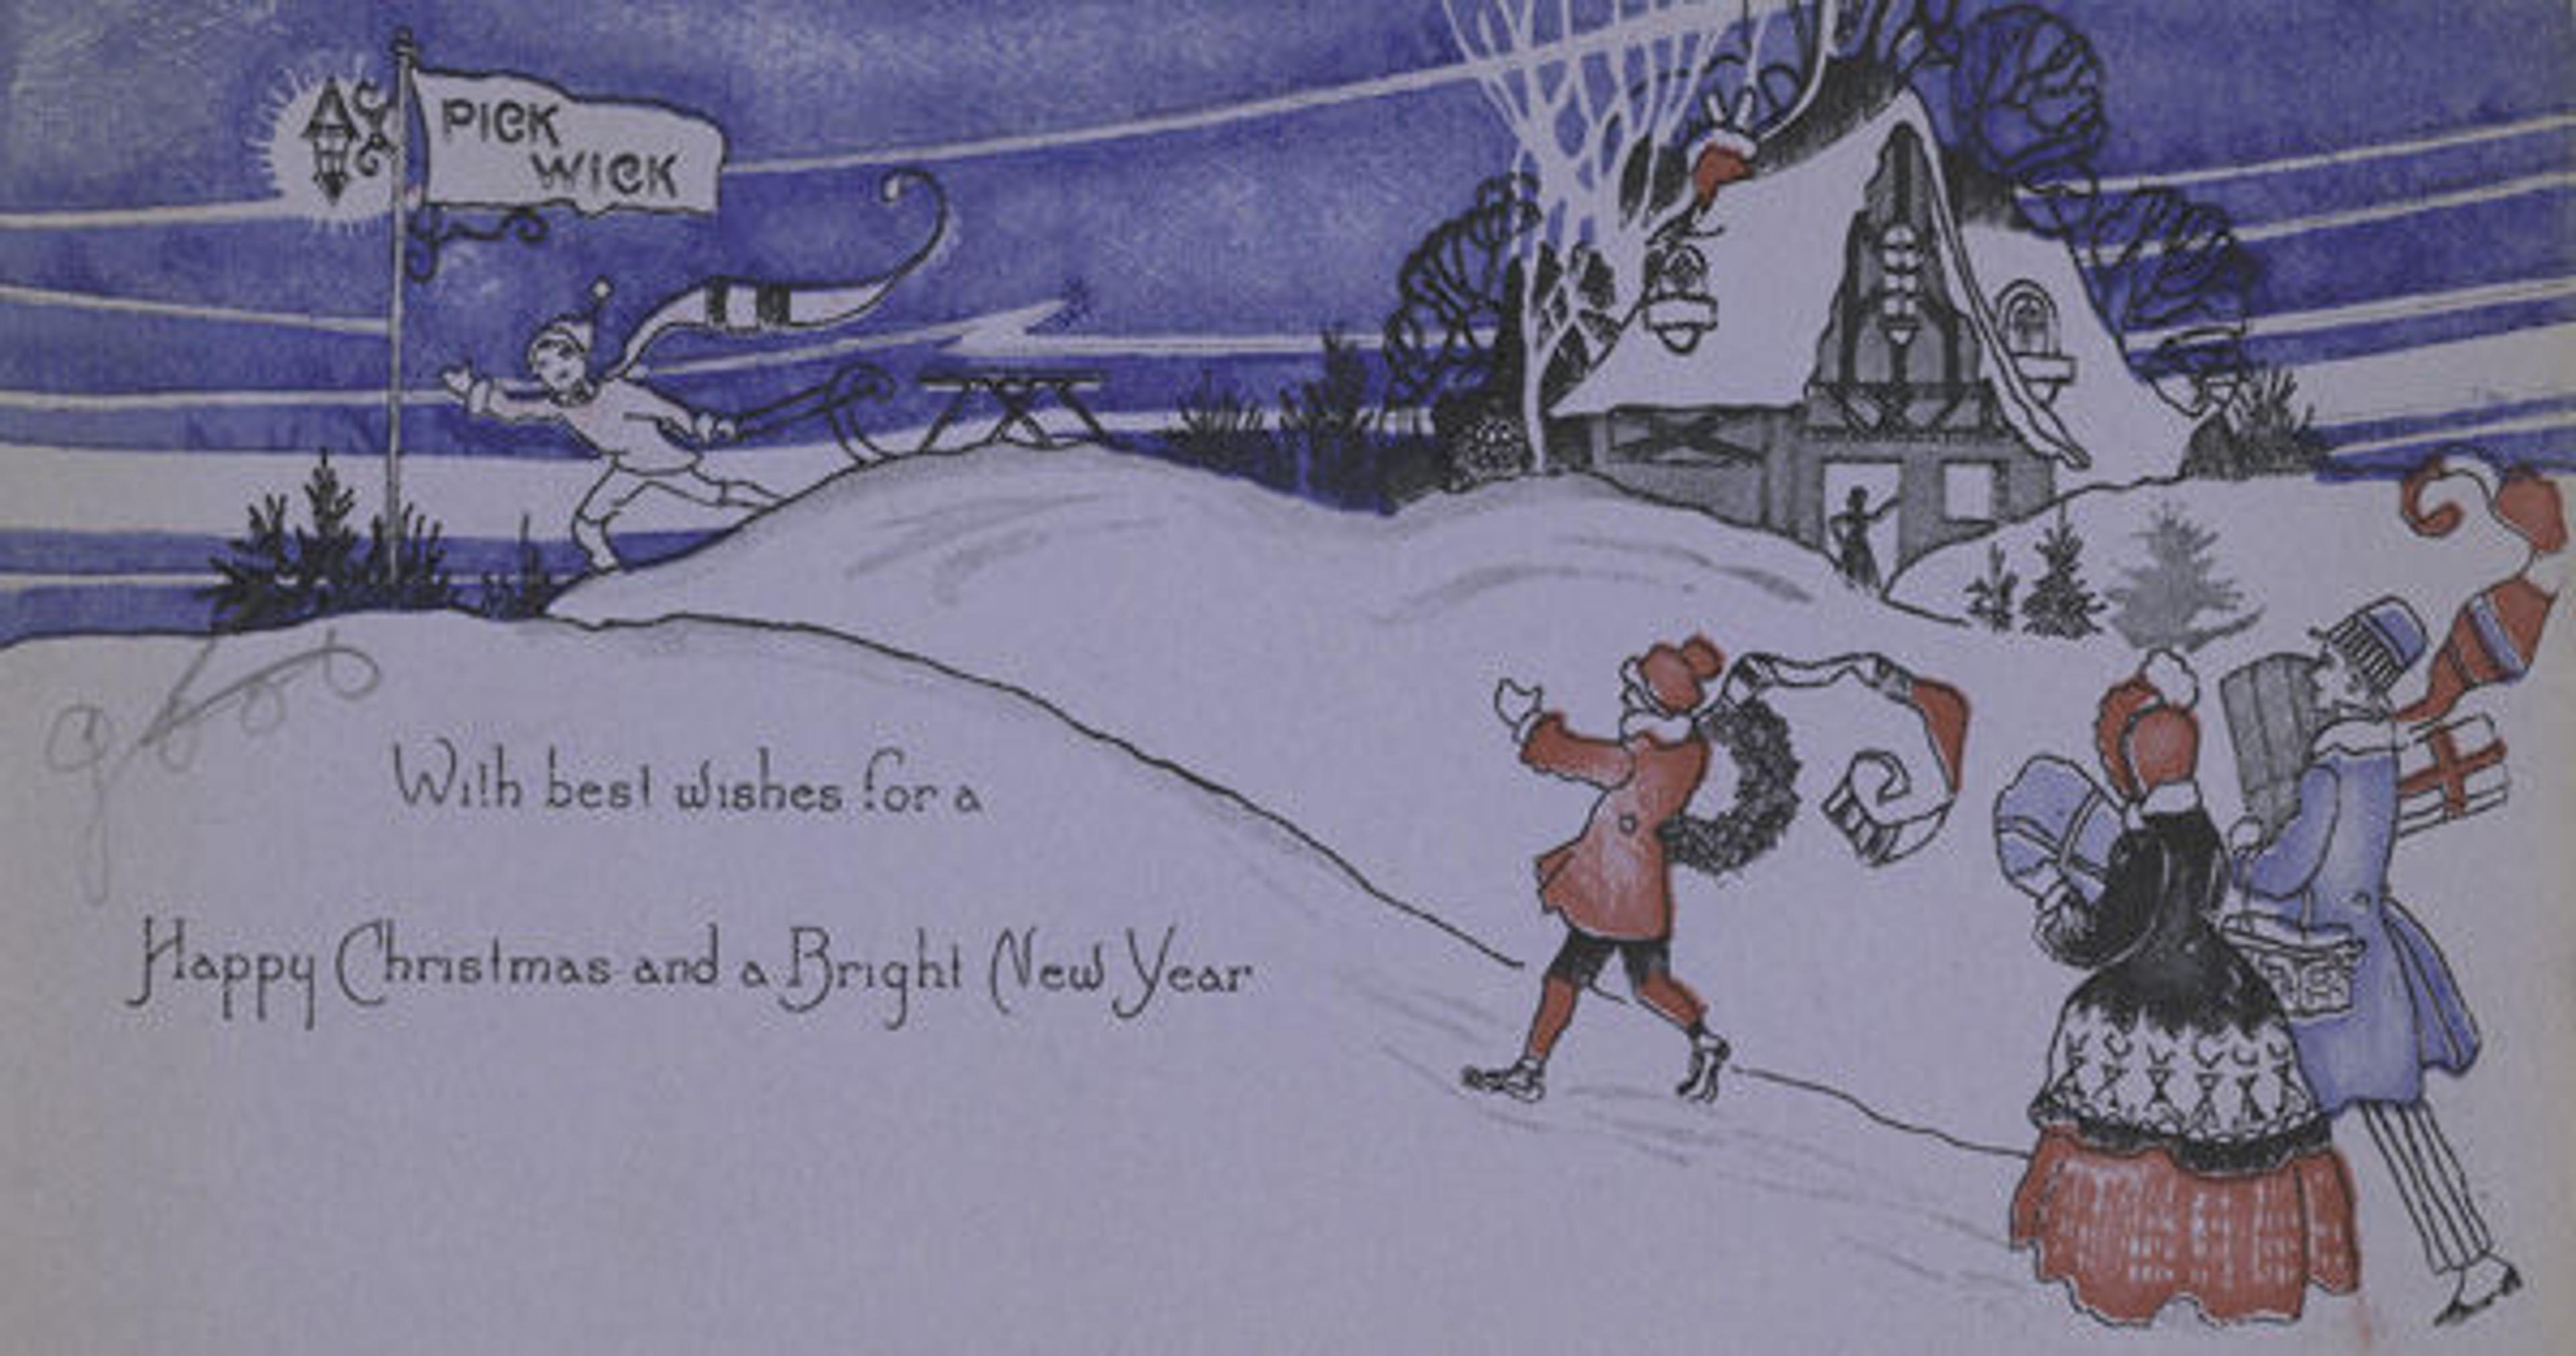 With best wishes for a Happy Christmas and a Bright New Year, 1920s